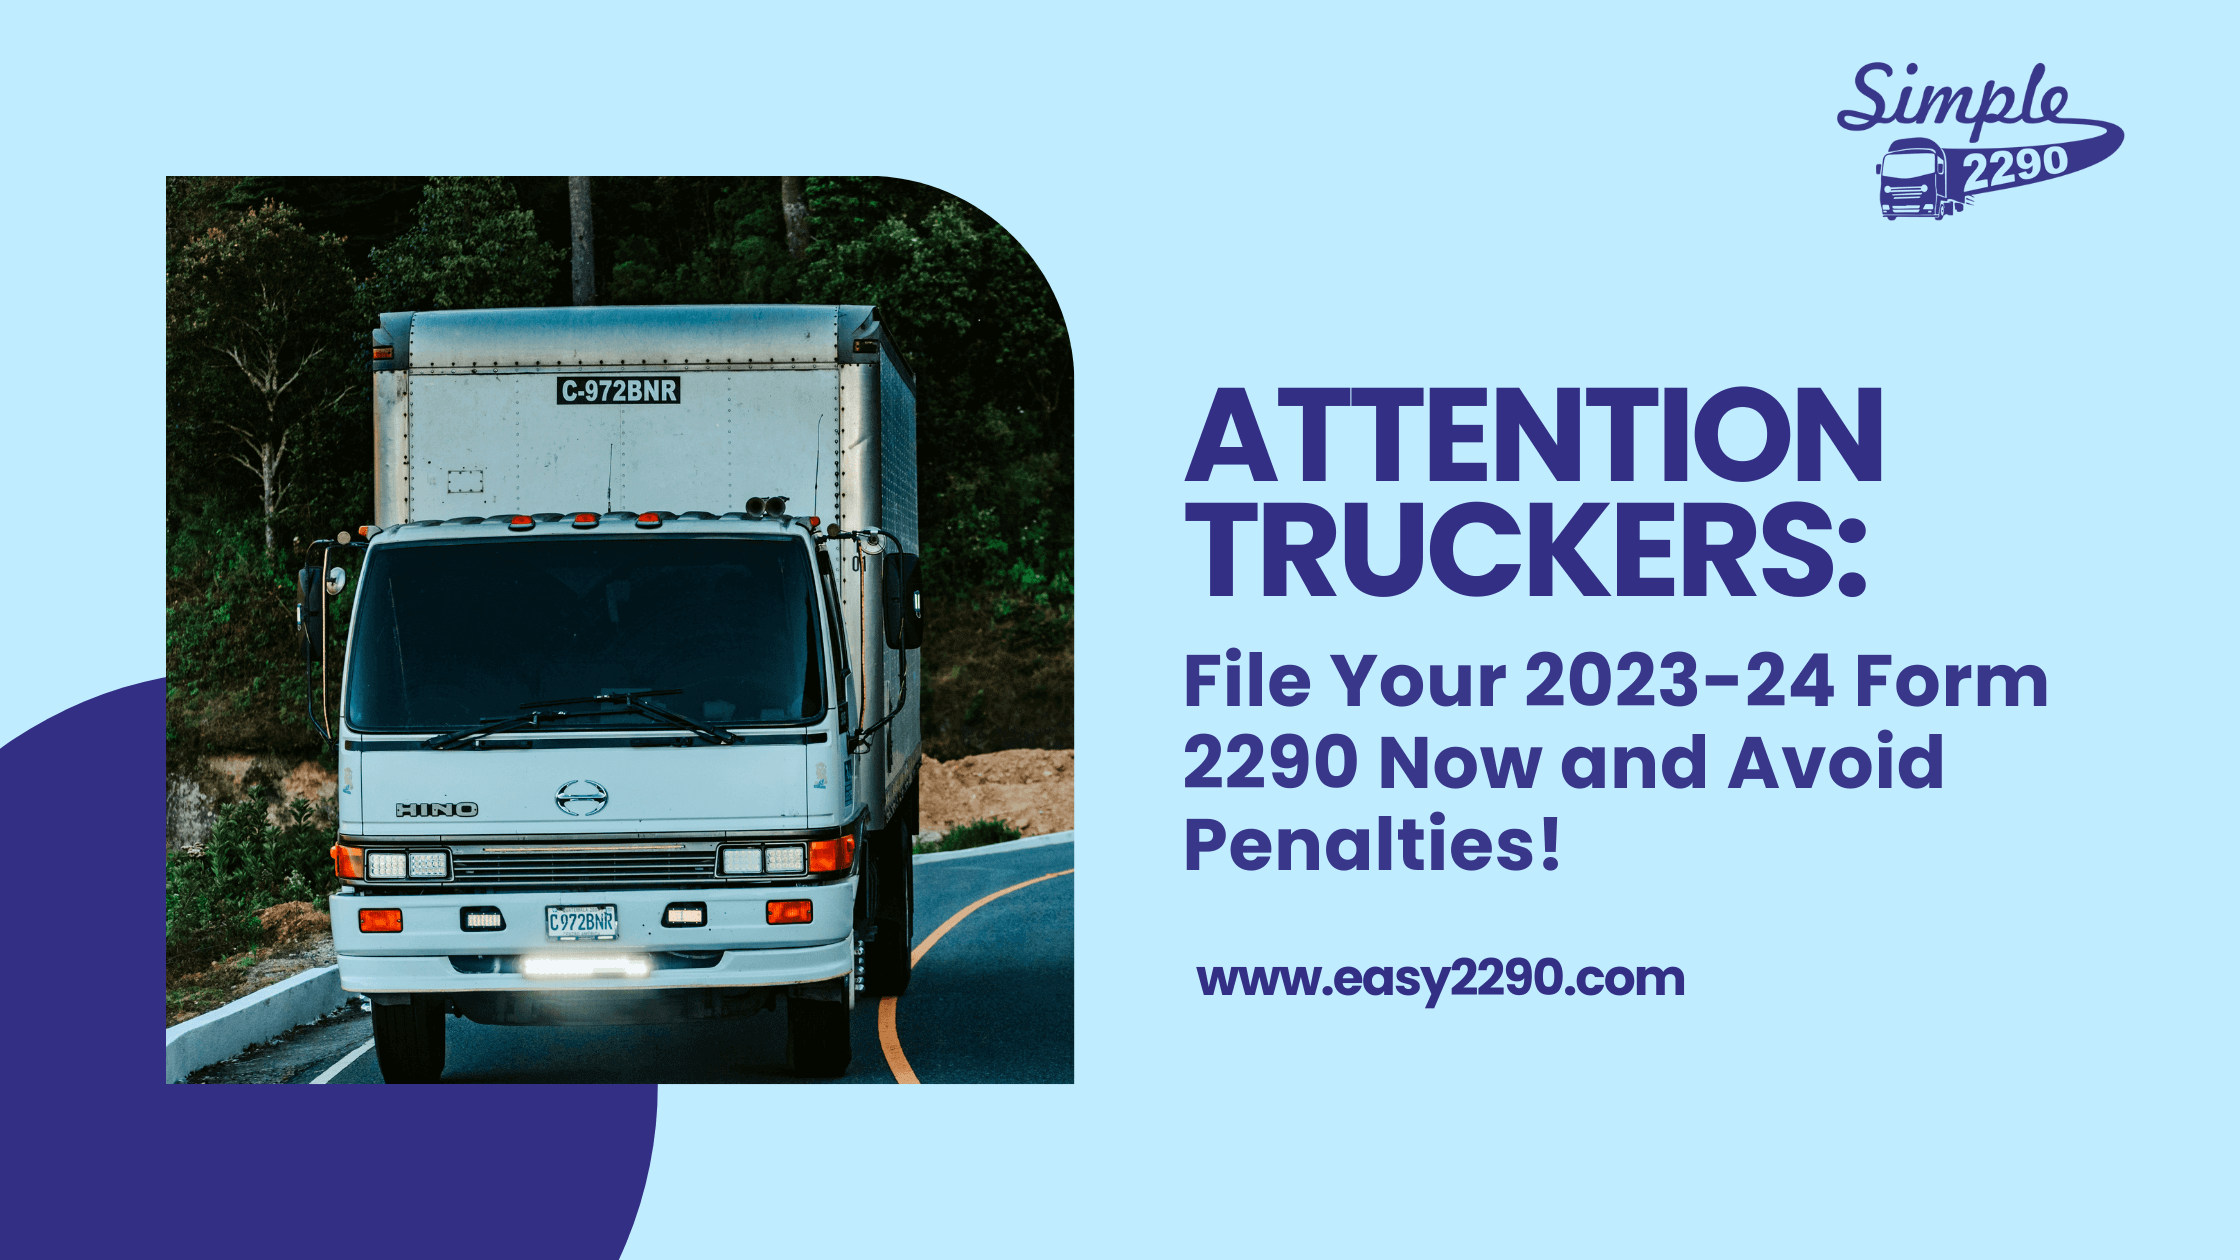 Attention Truckers: File Your 2023-24 Form 2290 Now and Avoid Penalties!